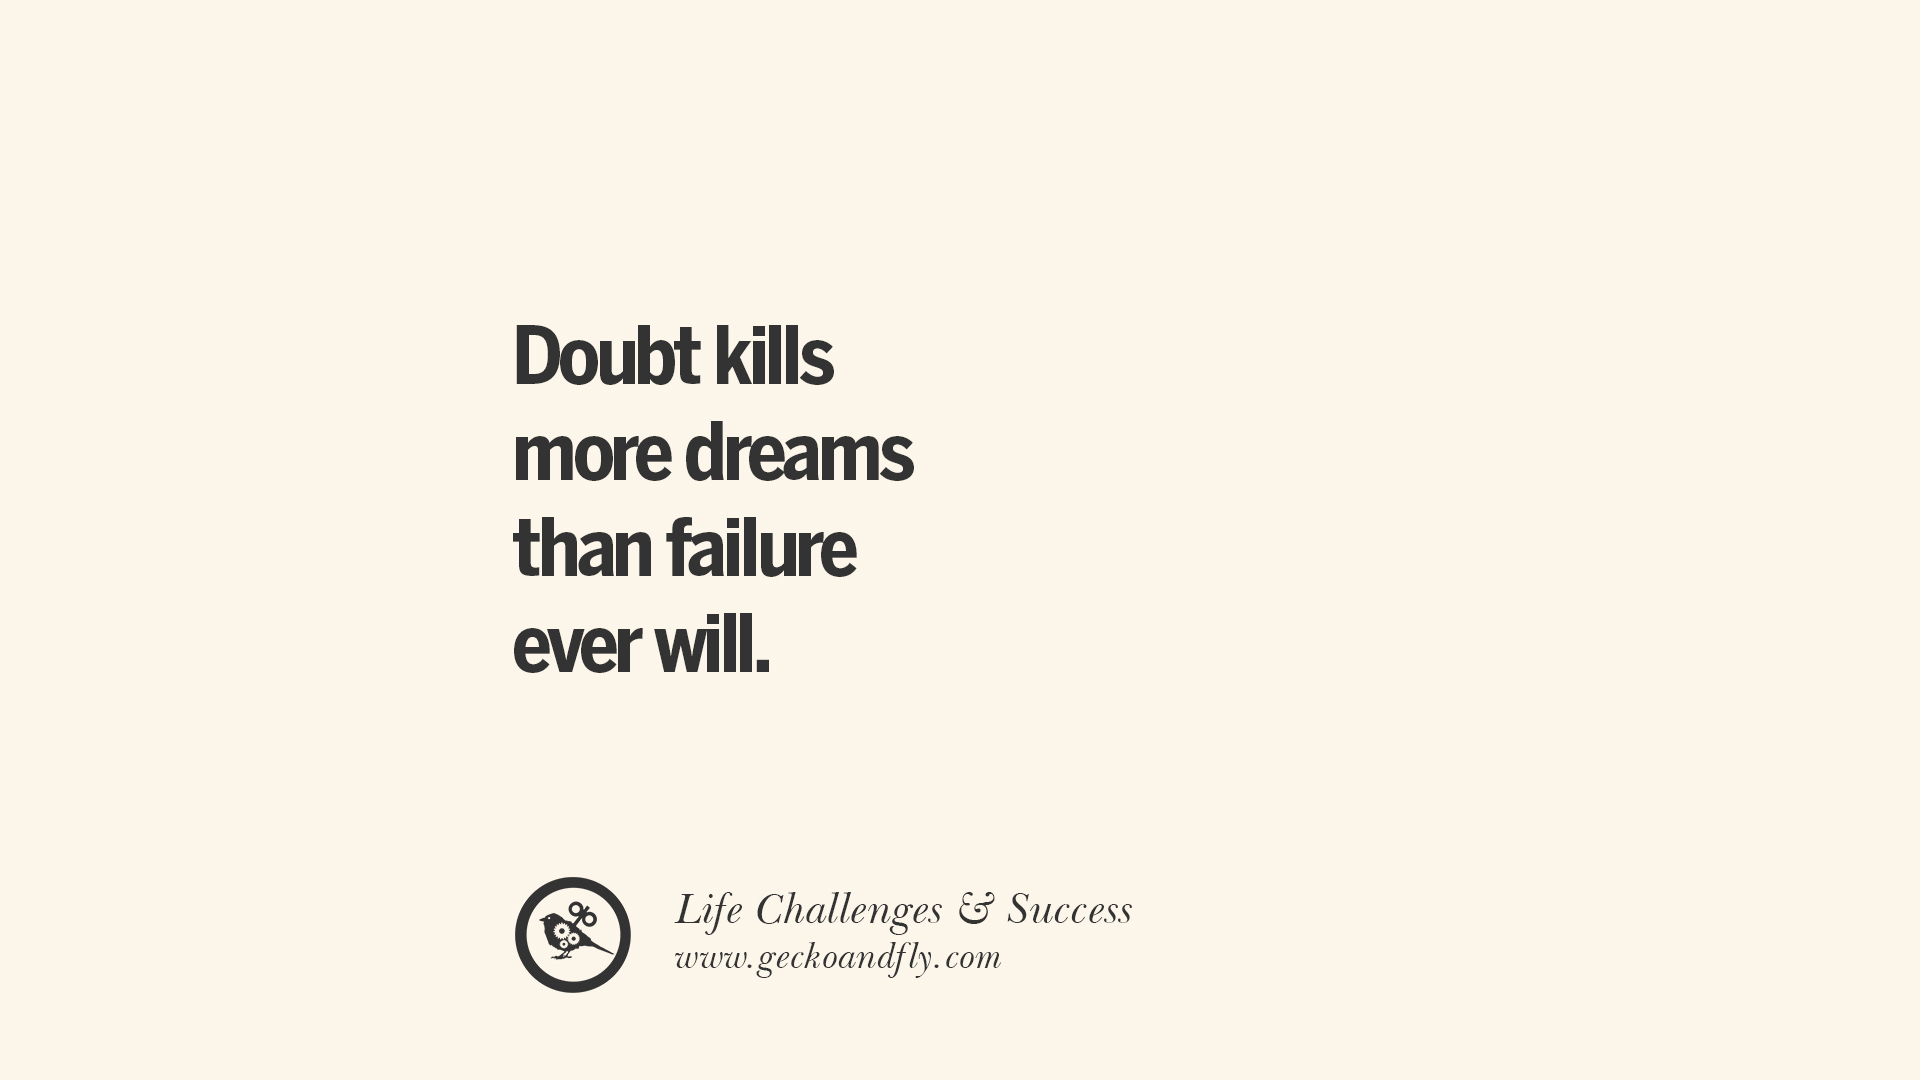 Doubt kills more dreams than failure ever will quotes about life challenge and success instagram